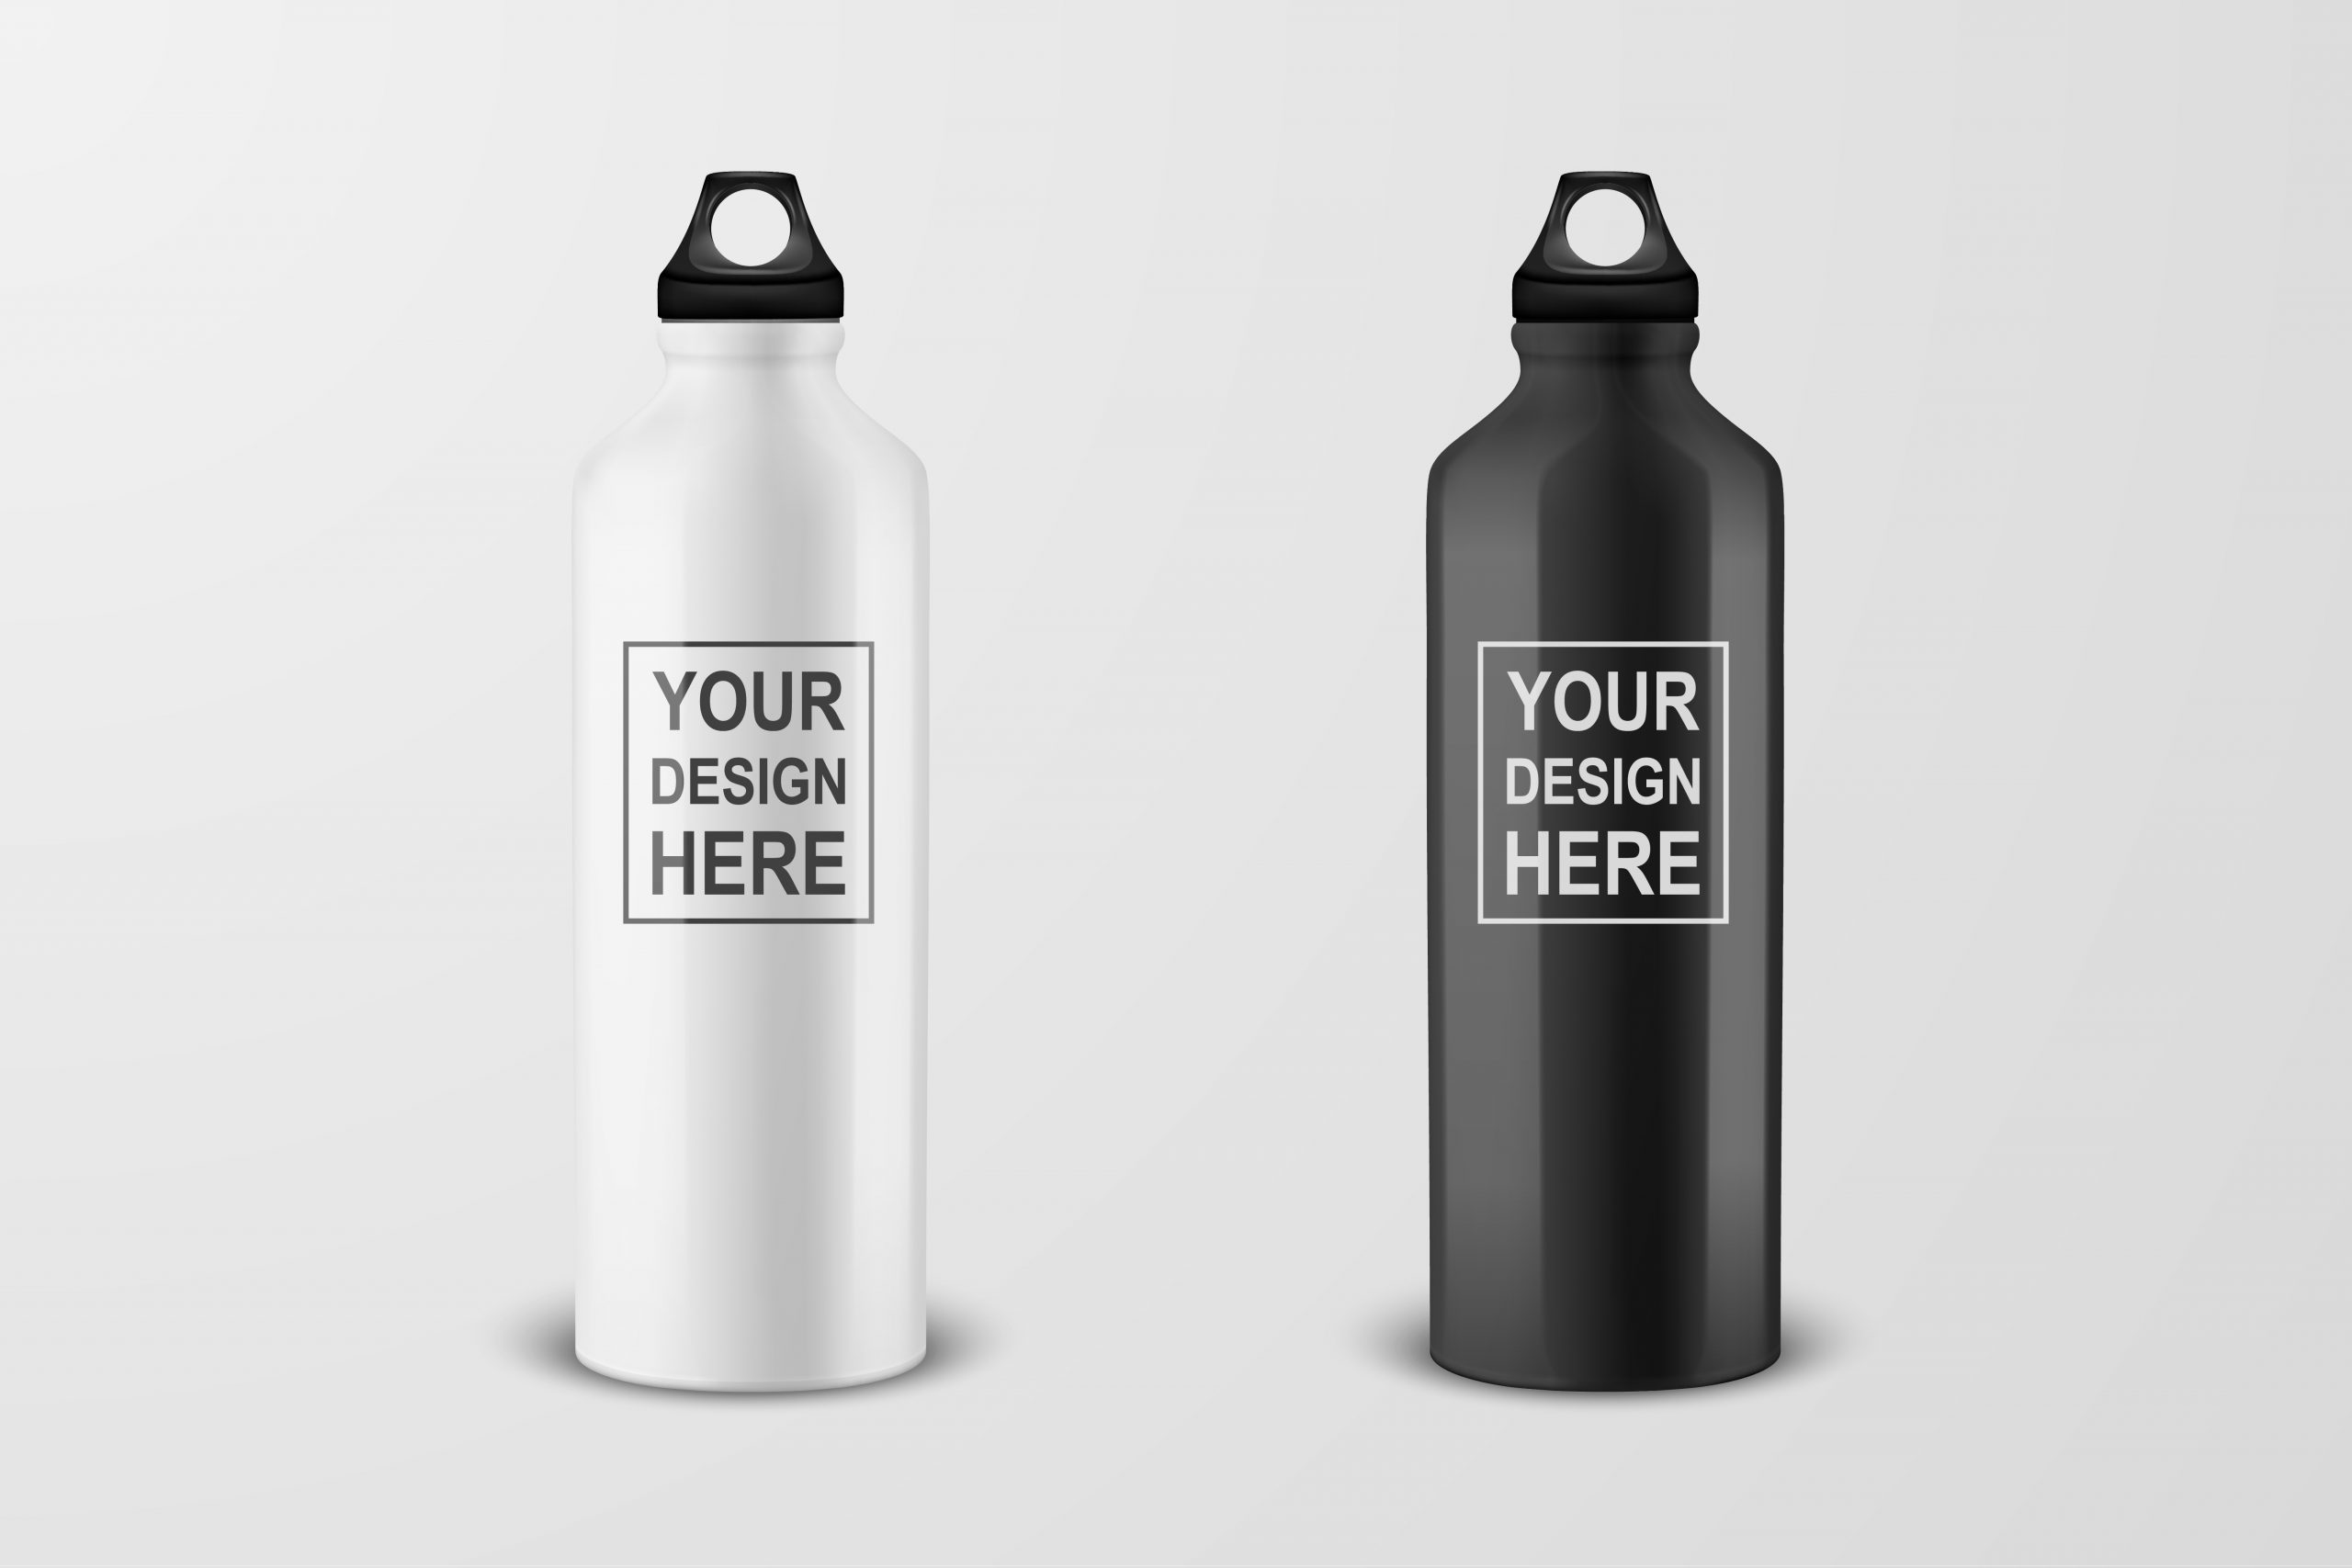 Are Promotional Drink Bottles Good Idea